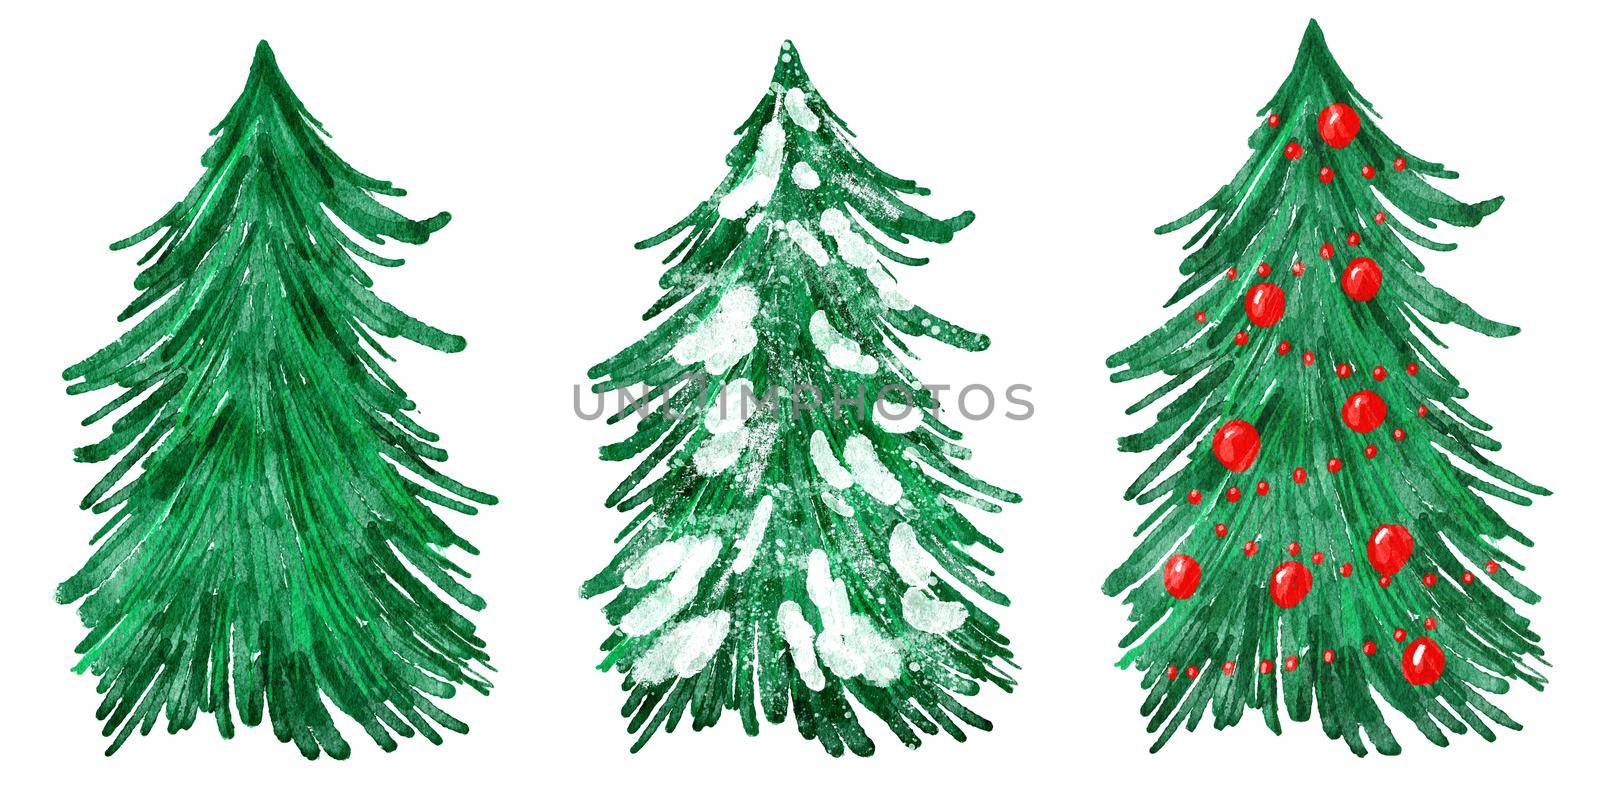 Watercolor hand drawn illustration of Christmas tree. Winter new year evergreen fir pine spruce plant. December season celebration design, holiday party print for invitations cards, isolated on white background. by Lagmar